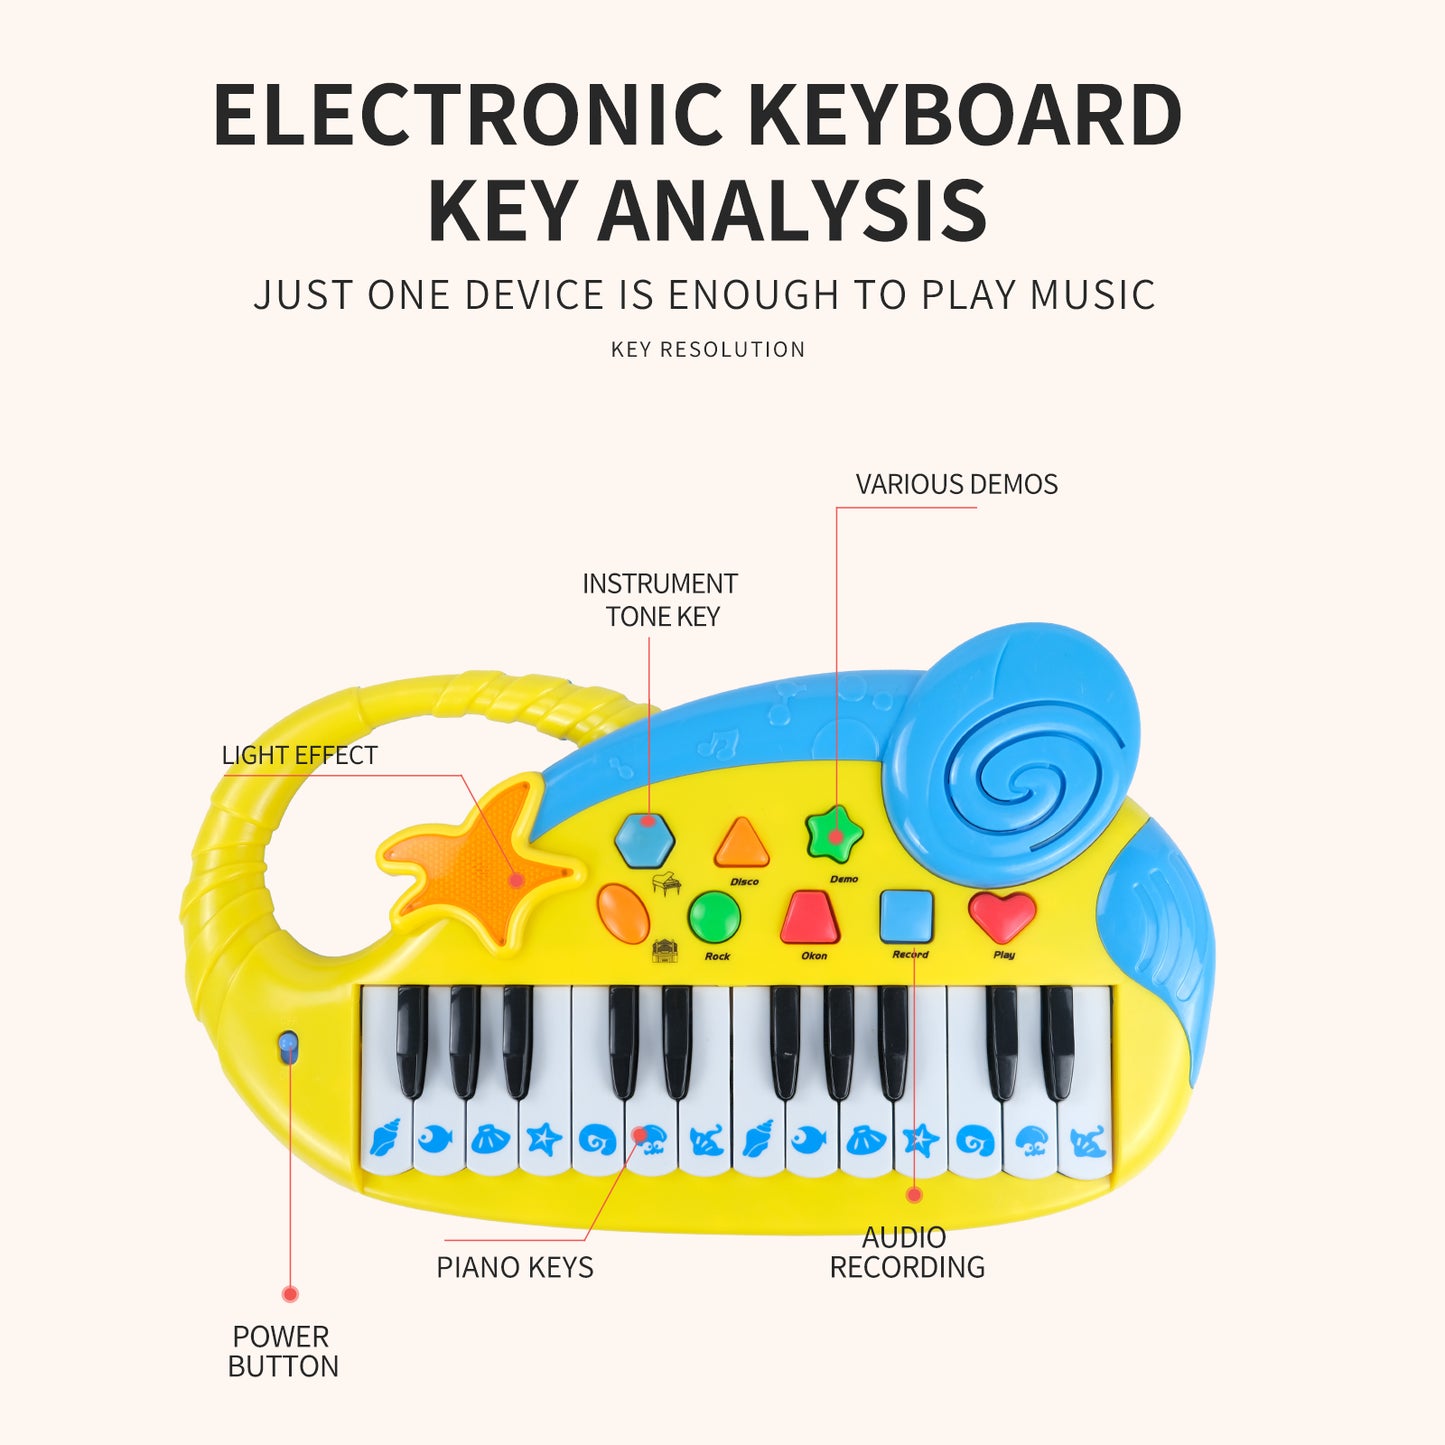 AOQIMITENJOY Conch Musical Instrument Electronic 24 Keys Keyboard Toys LED Lighting Children's Toys Birthday Gifts for Boys and Girls 3 Year Old+ HK-9090A